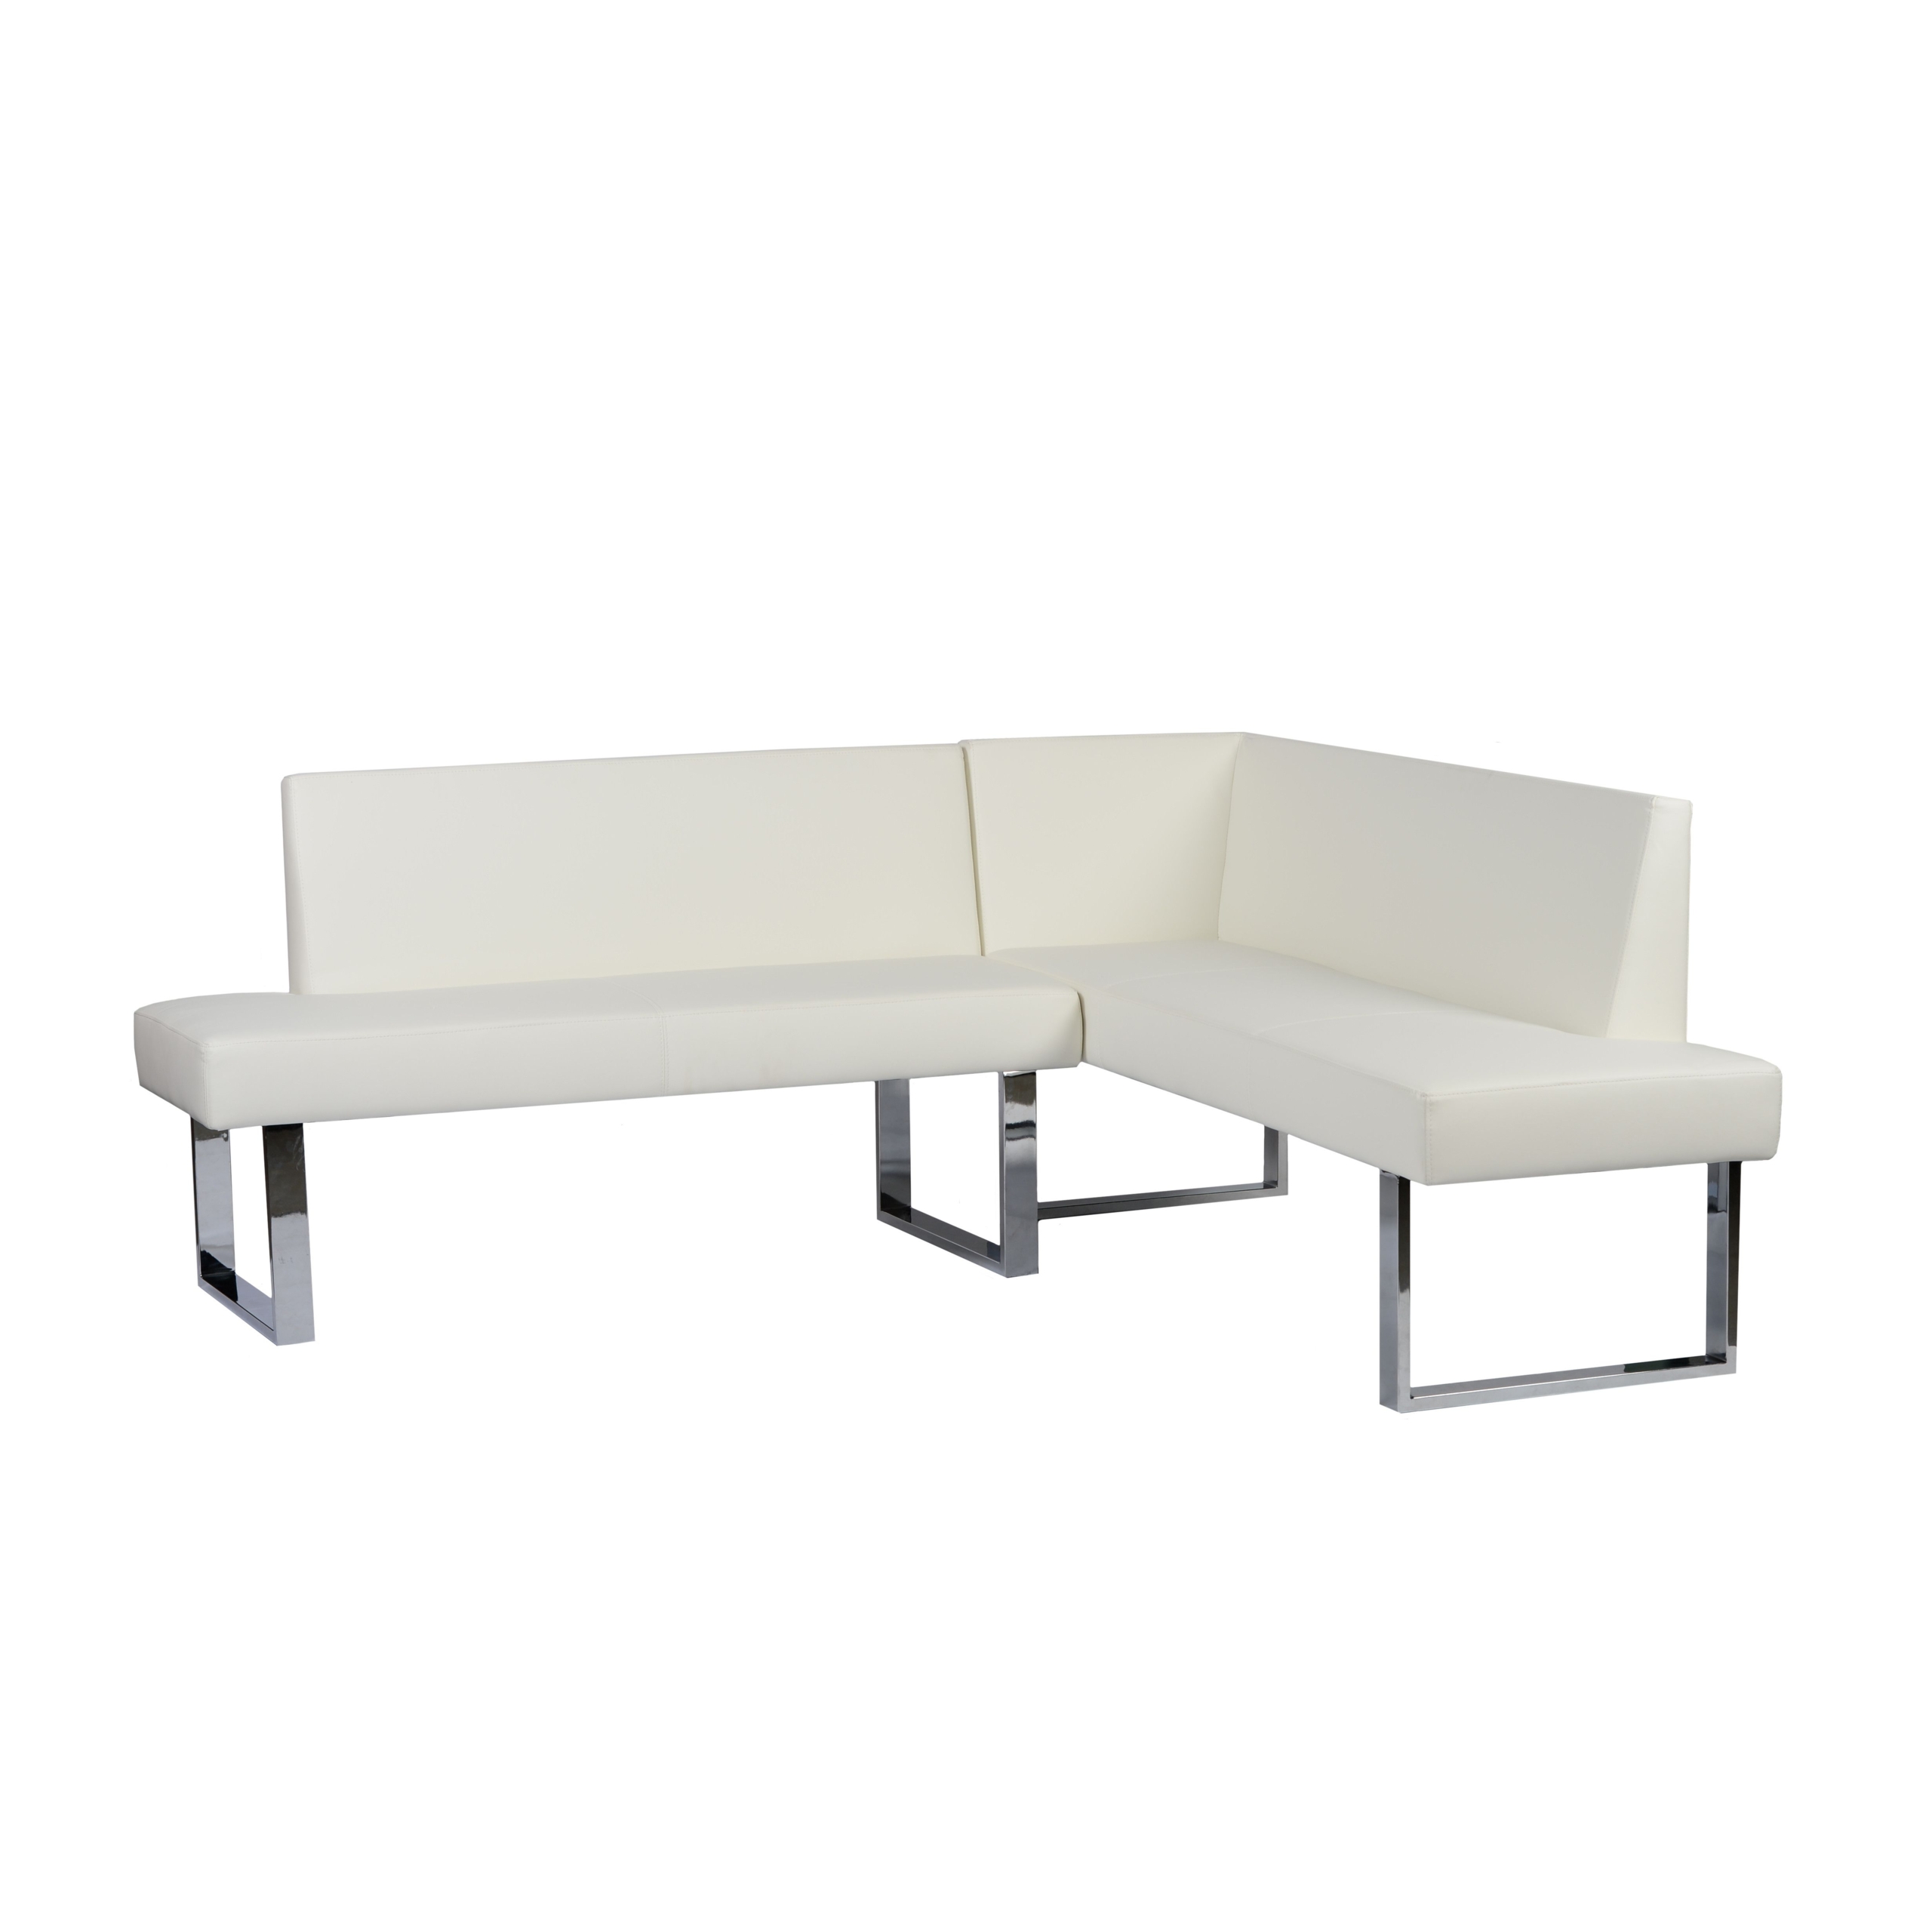 Futuristic Faux Leather Corner Bench With Metal Frame